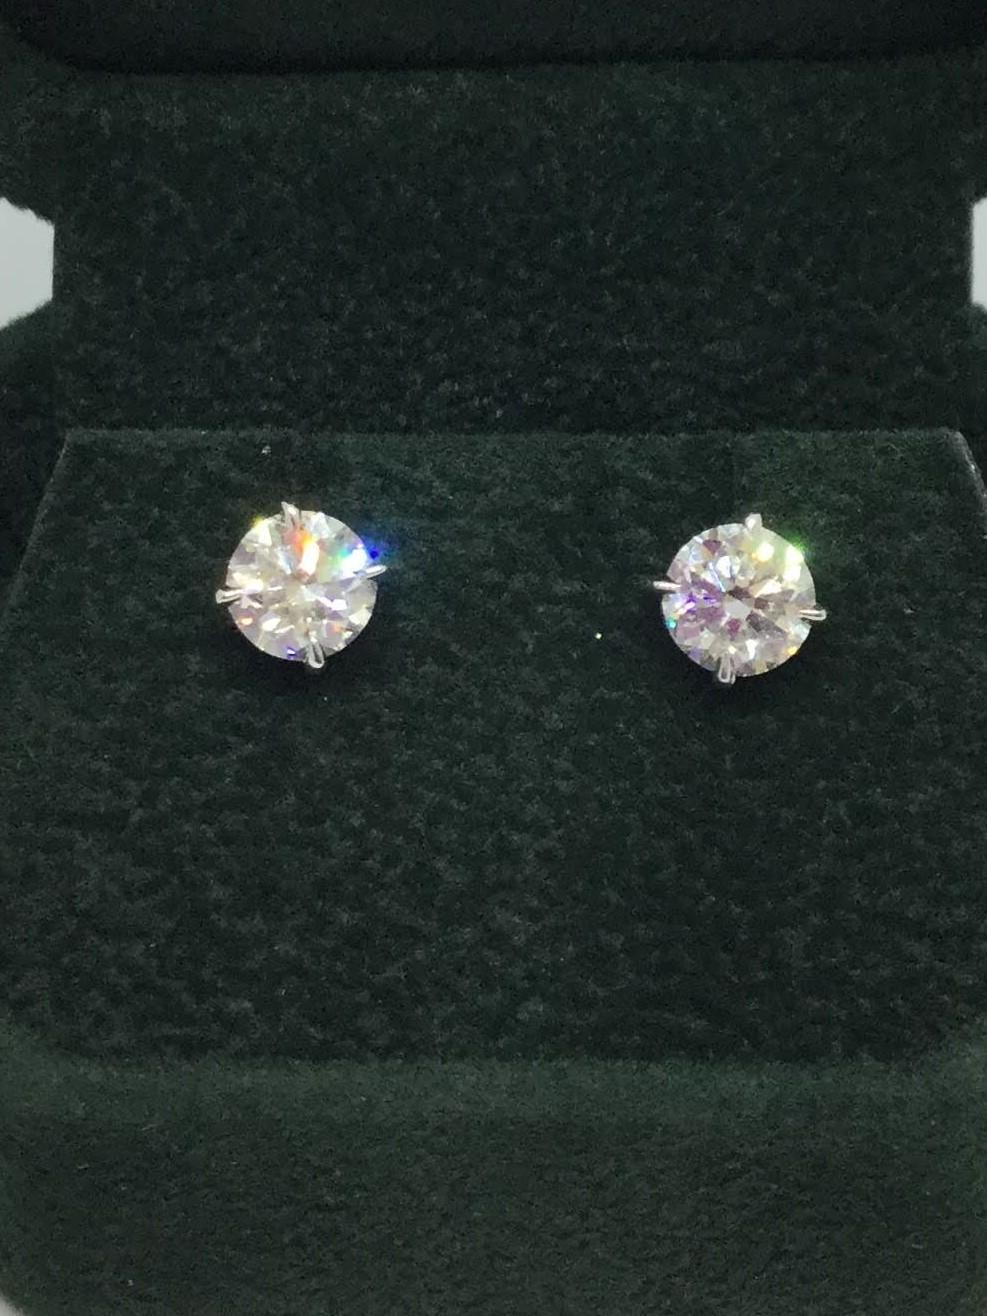 14K white gold diamond studs. Diamonds weigh 2.04 ctw H/SI2. Diamonds are set in a wire basket setting with friction posts.